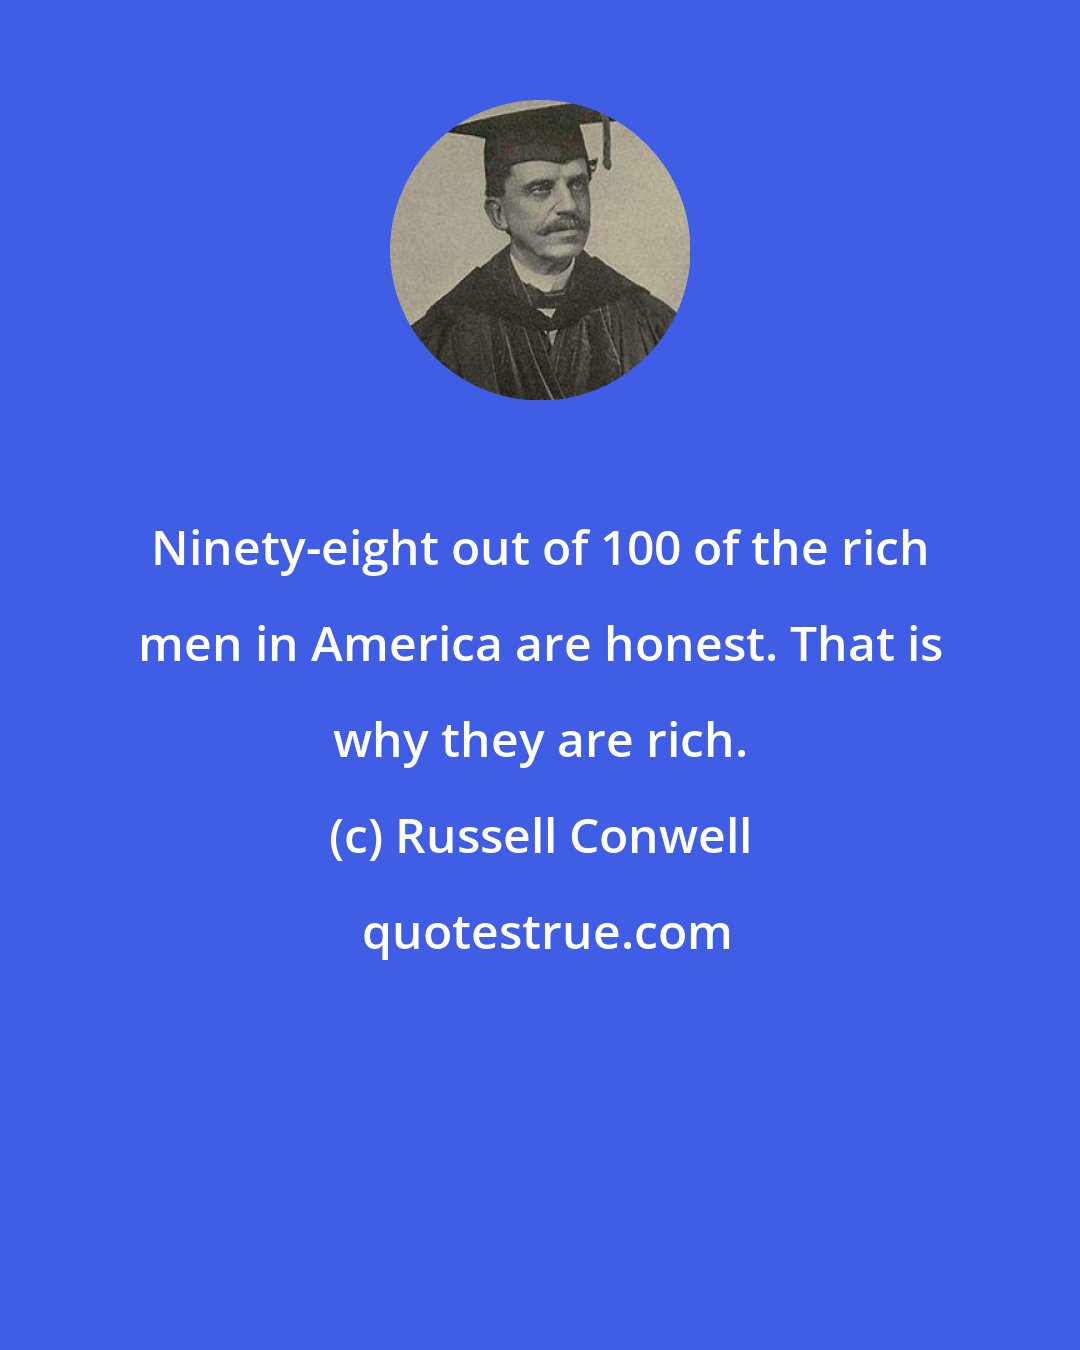 Russell Conwell: Ninety-eight out of 100 of the rich men in America are honest. That is why they are rich.